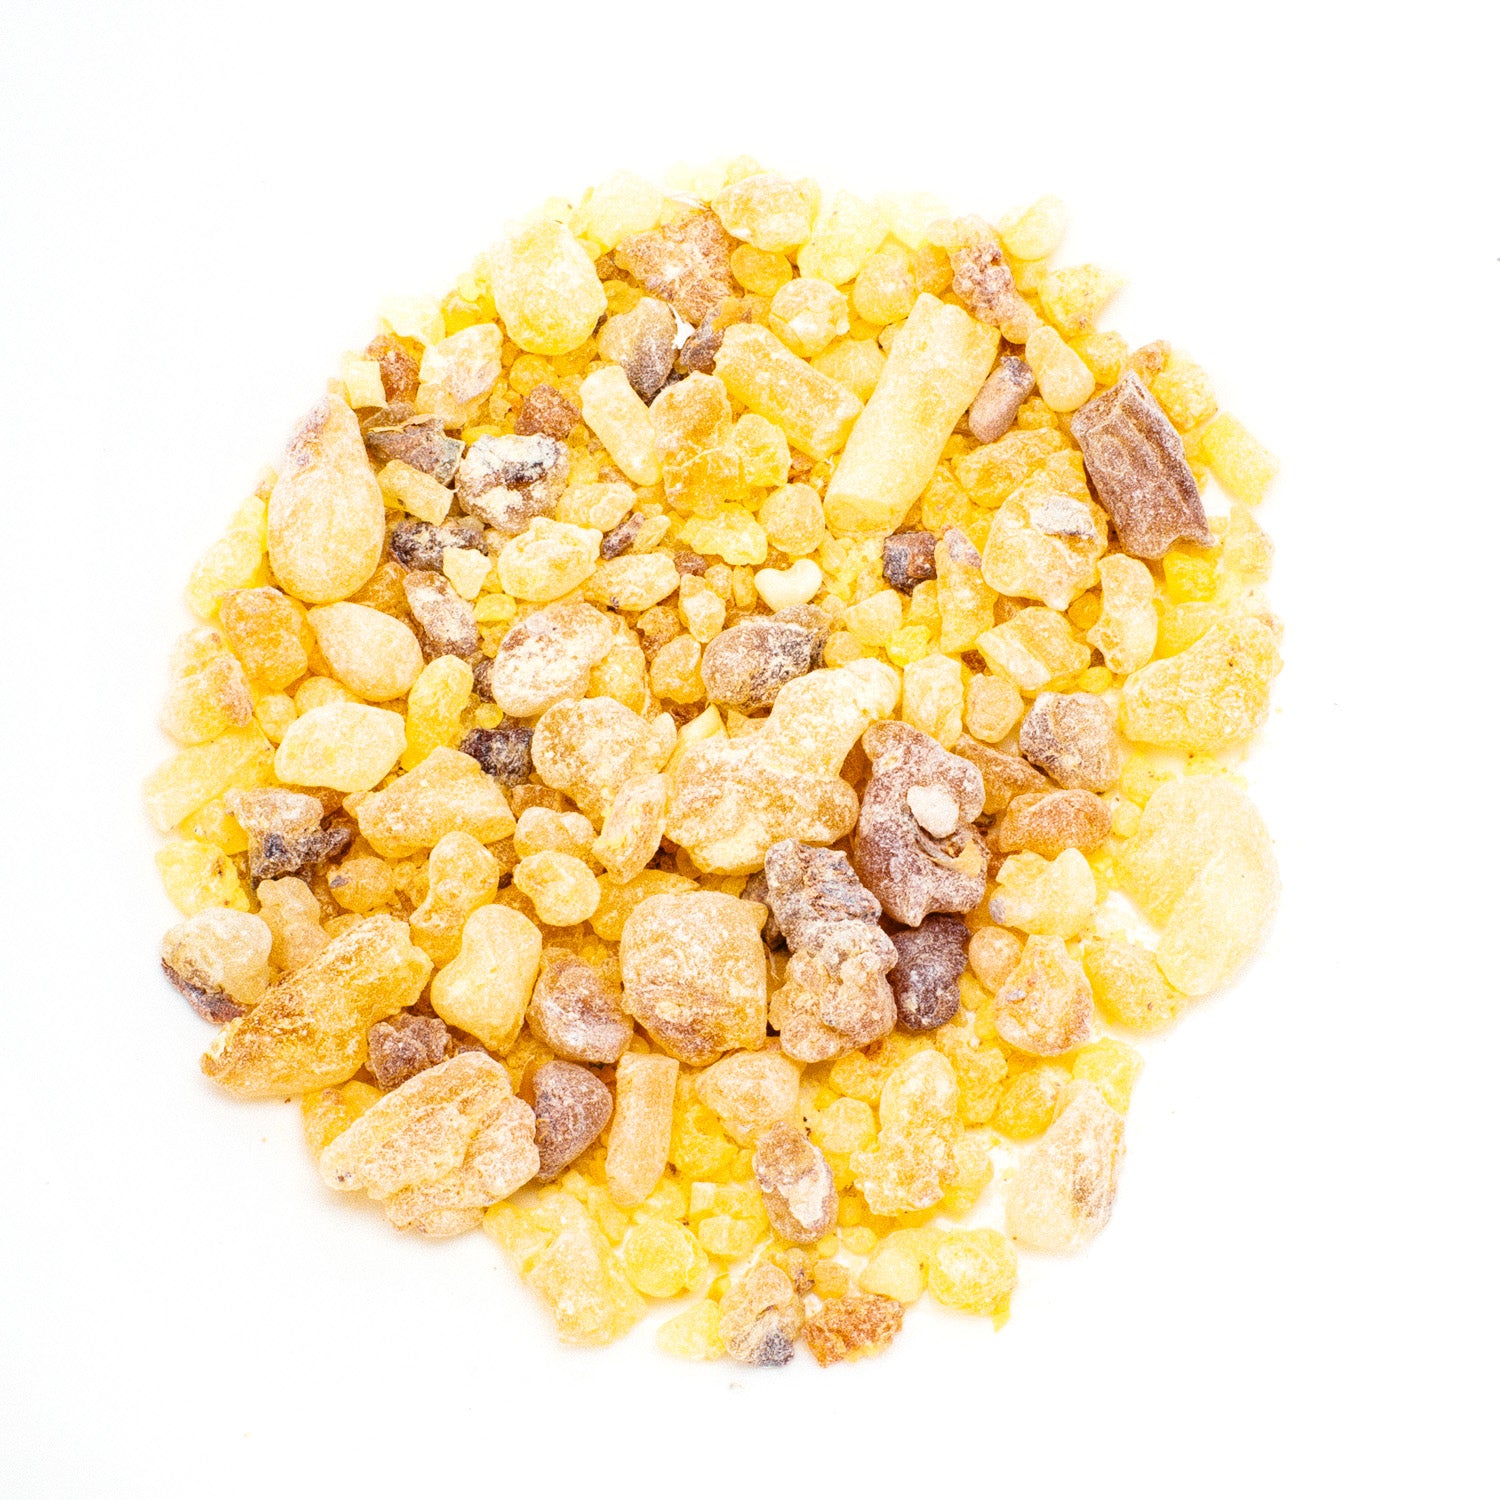 Frankincense Resin Incense from Ethiopia